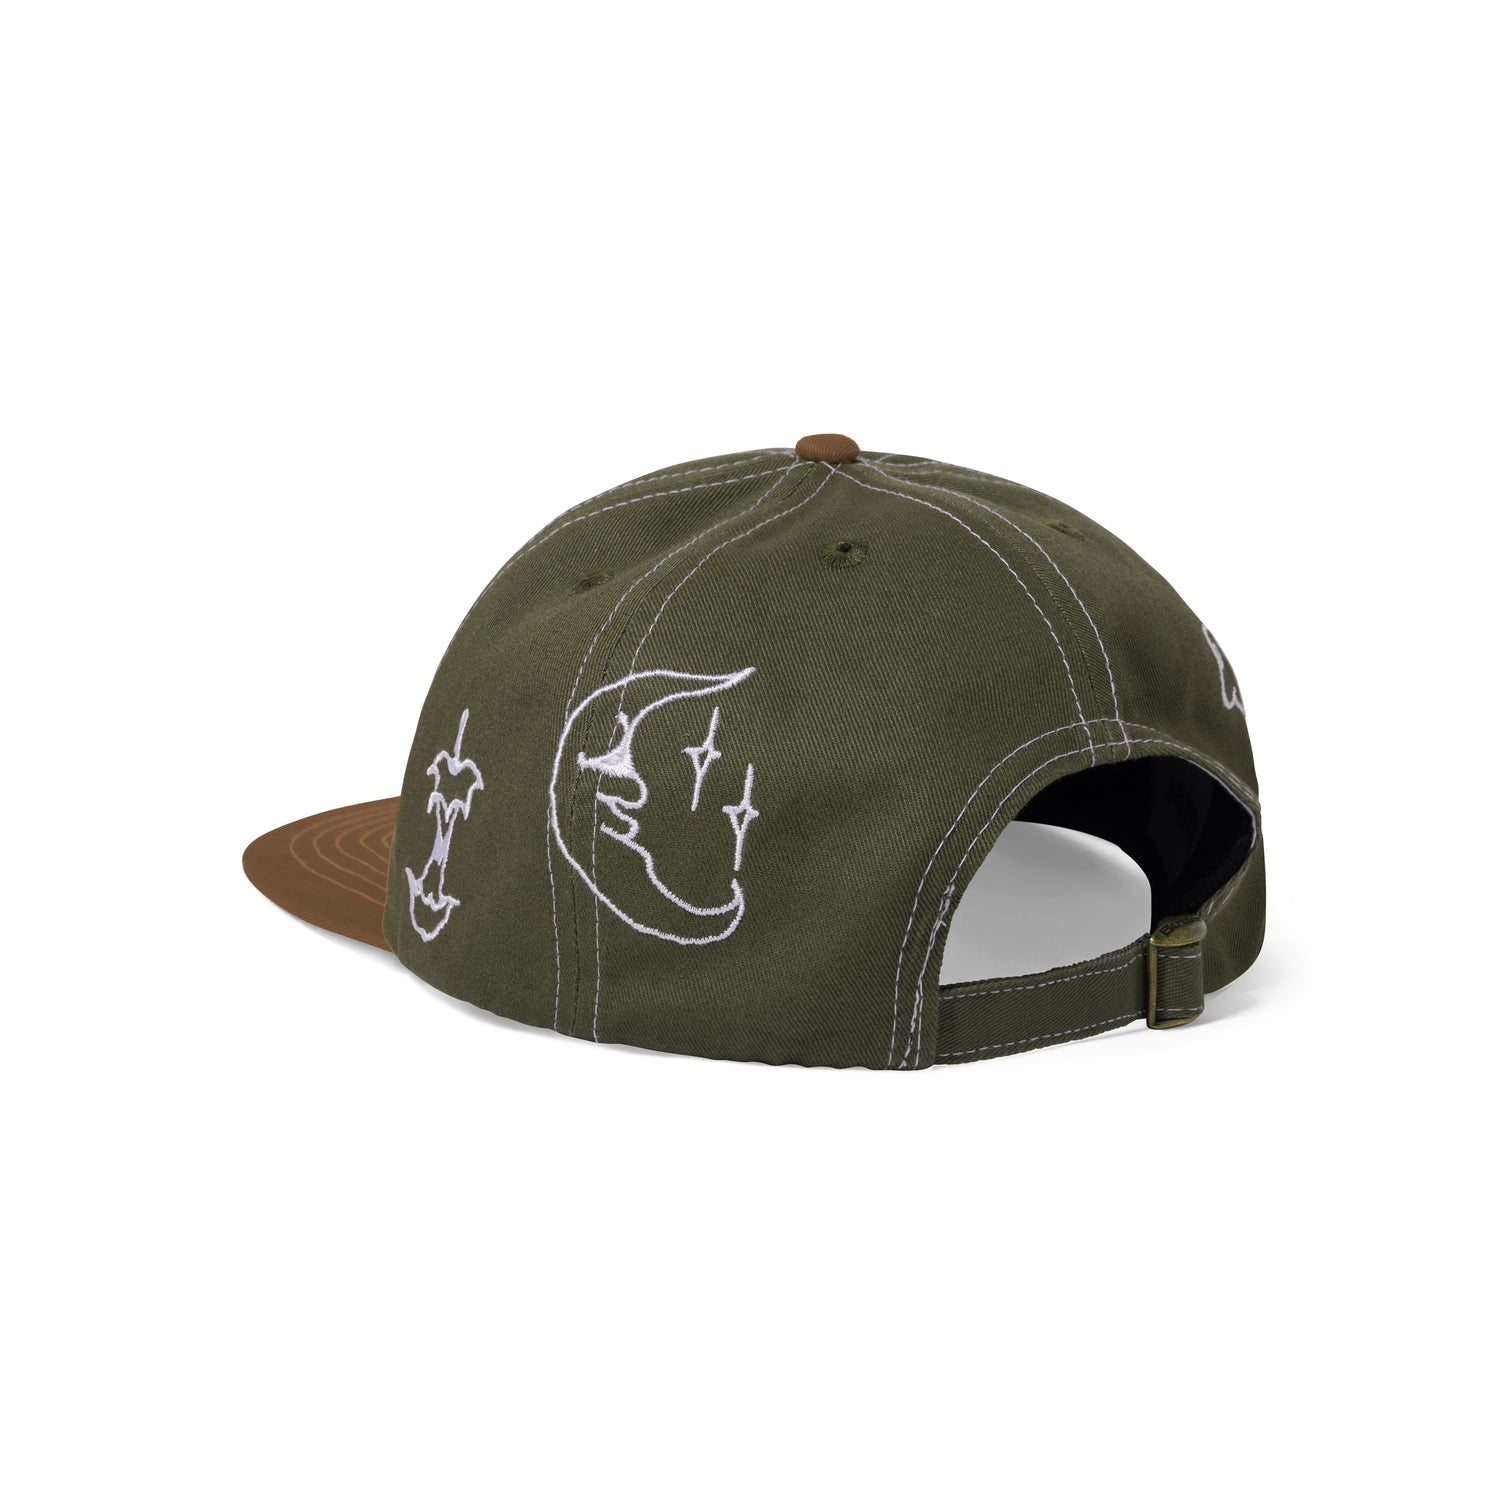 Critter 6 Panel Cap, Army / Brown